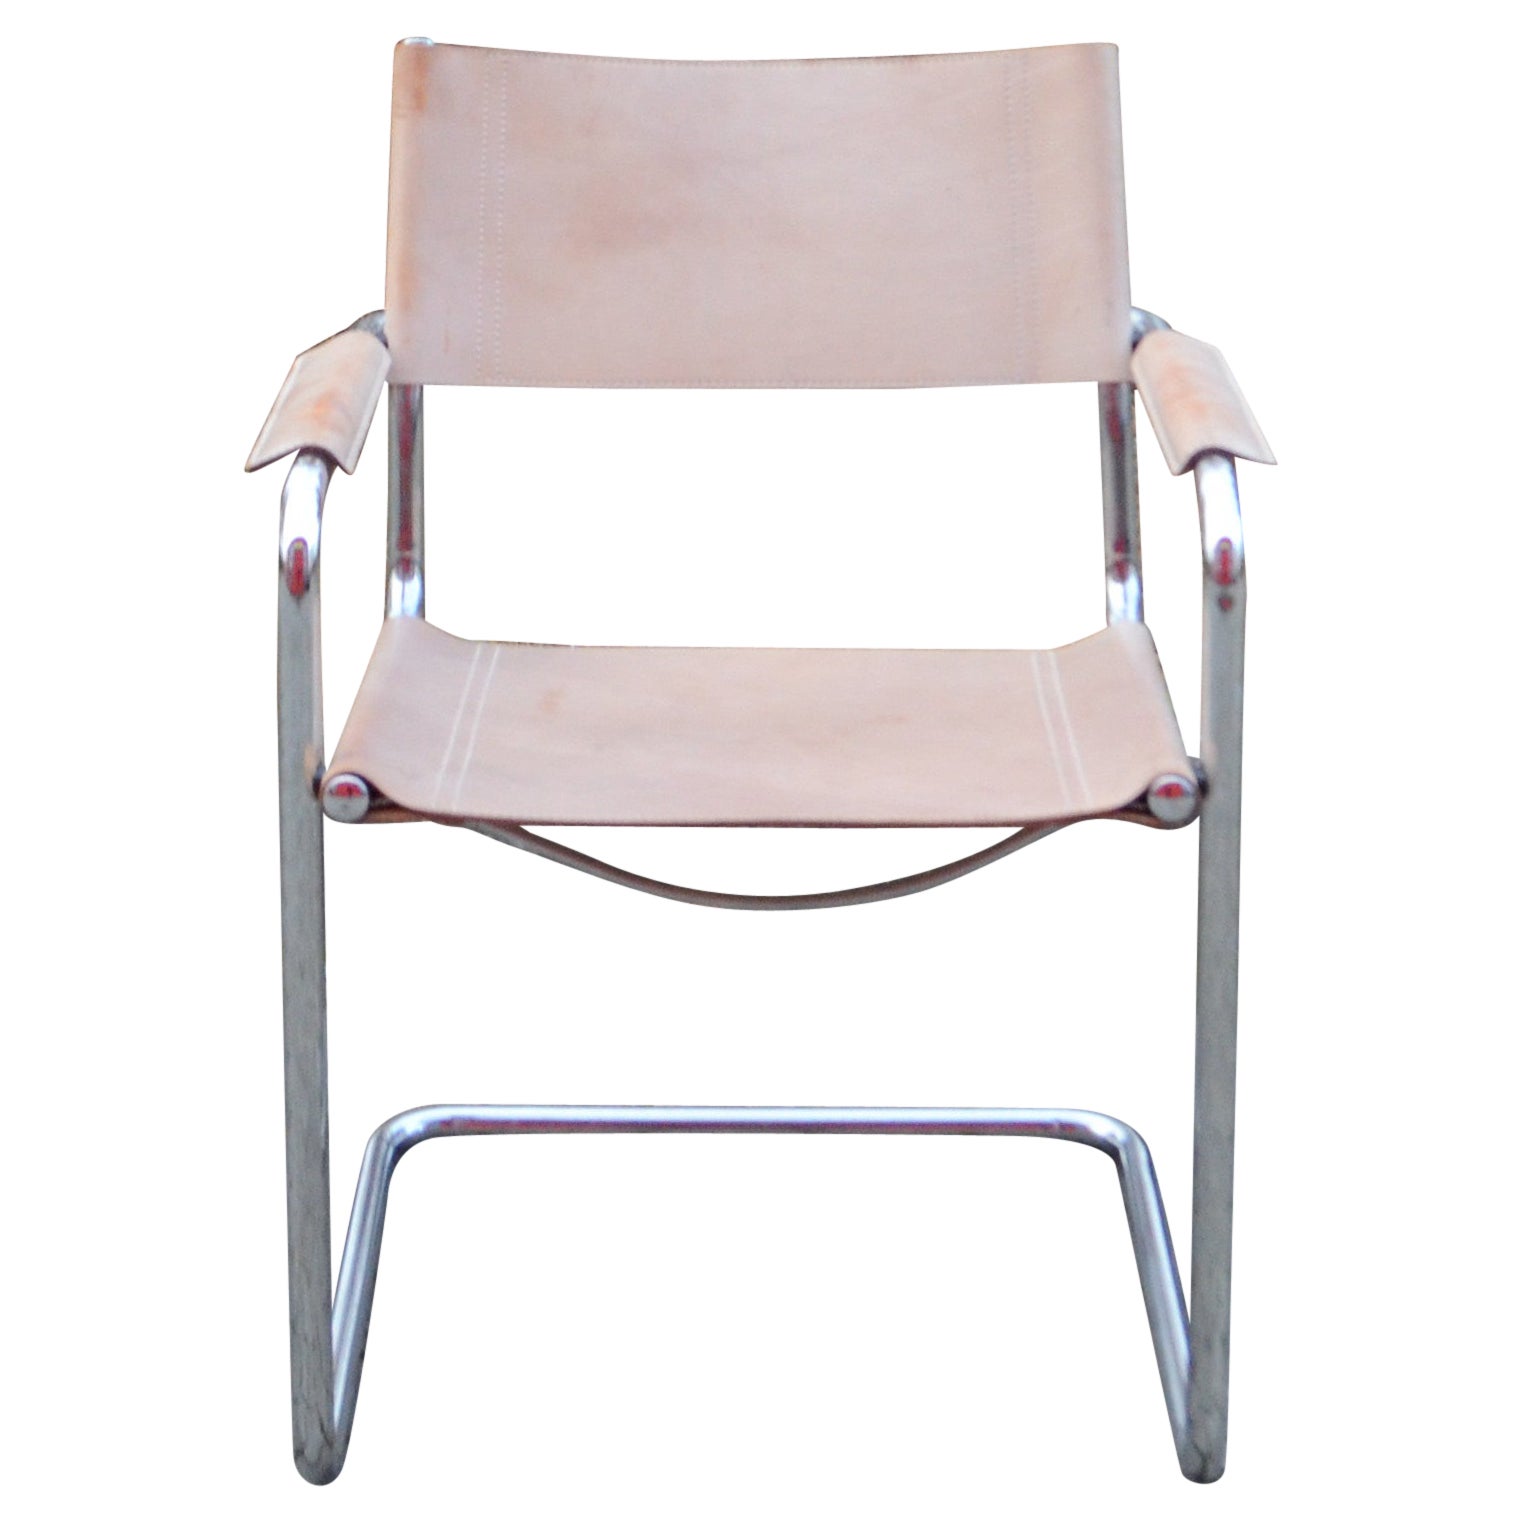 Matteo Grassi Cantilever MG Skin Coloured Leather Chair by Centro Studi For Sale